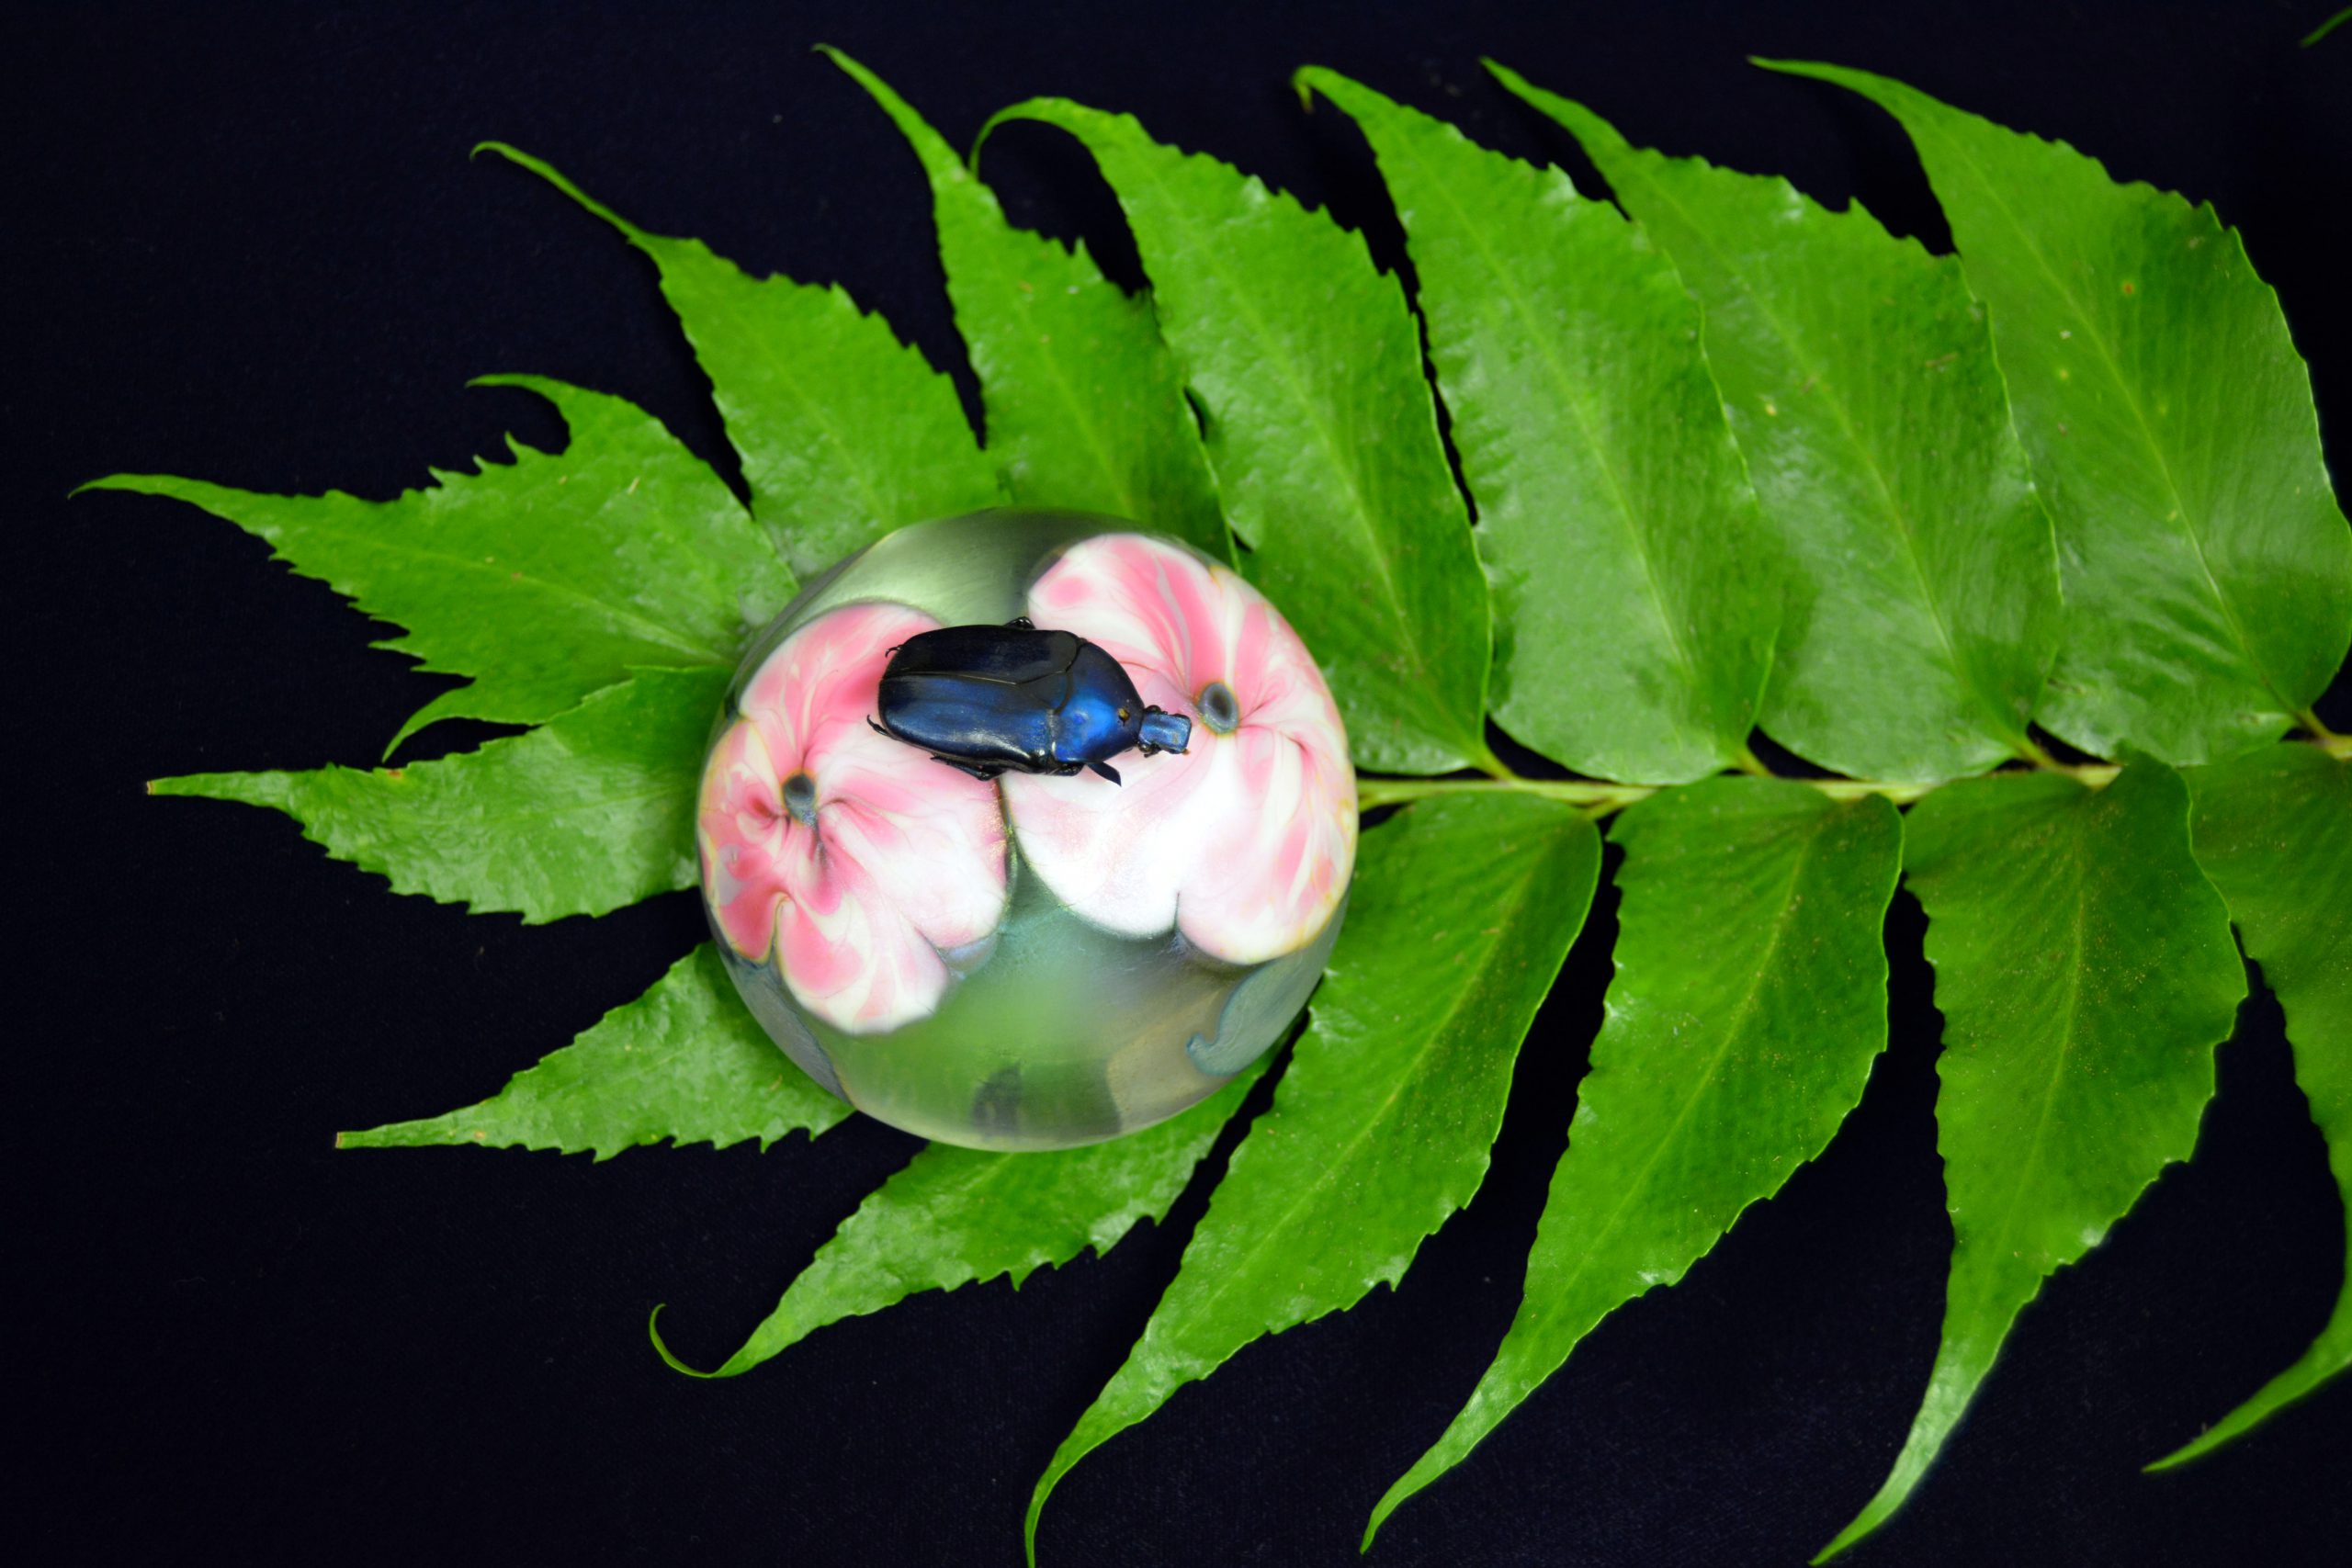 Image of artwork from Garden or earthly delights exhibit. A beetle lays on flowers in a clear capsule that rests on leaves